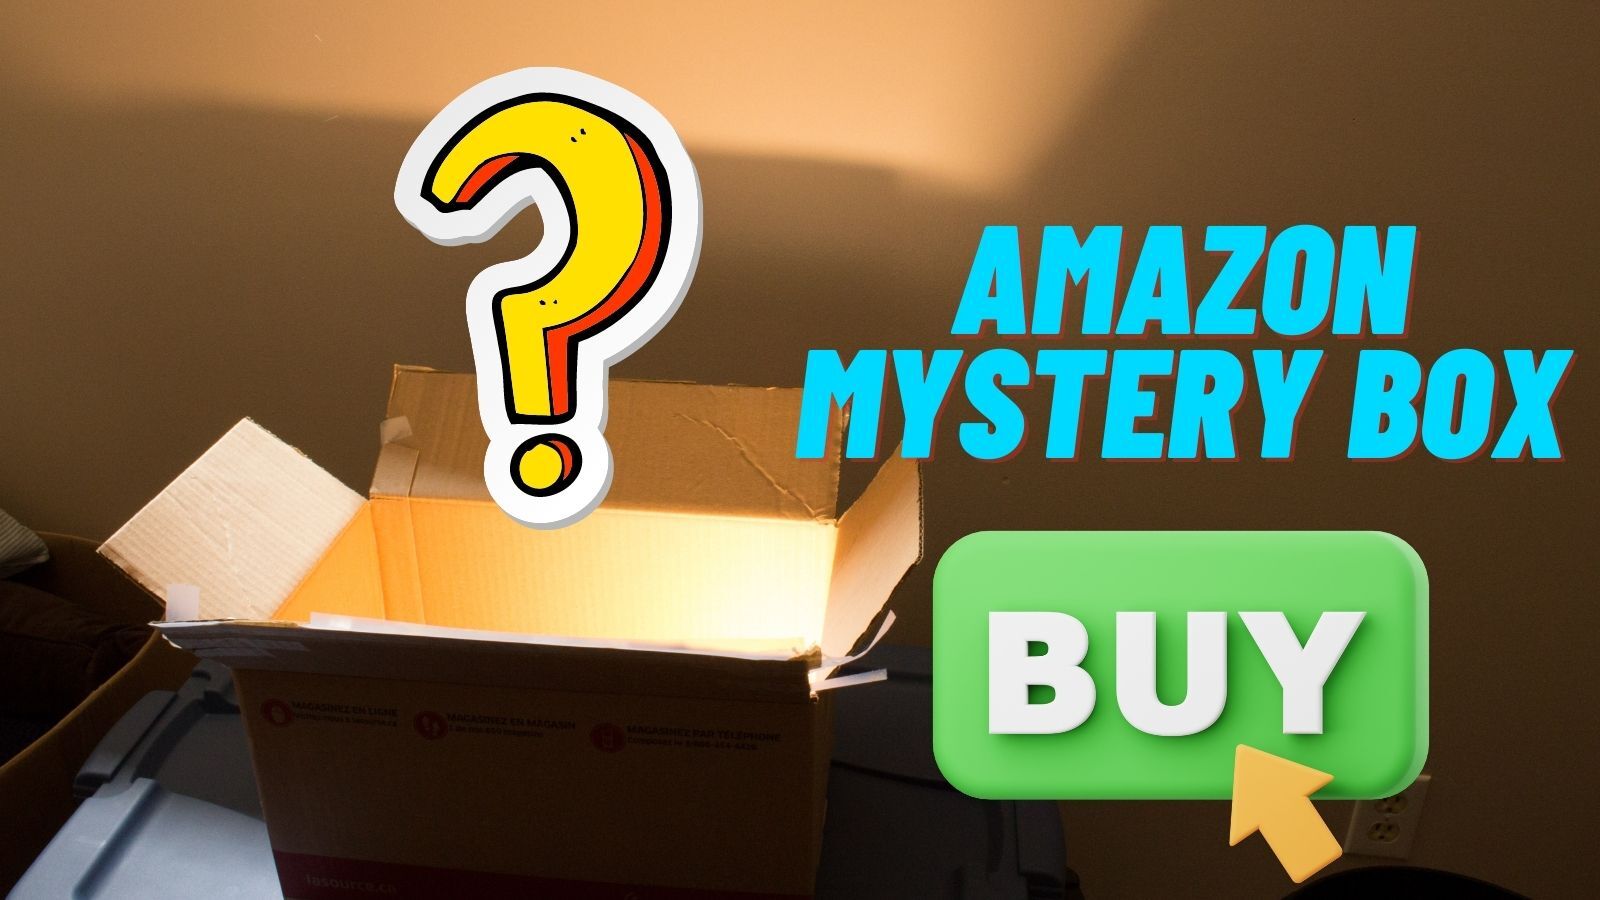 How To Buy Amazon Mystery Box [Step Guide]